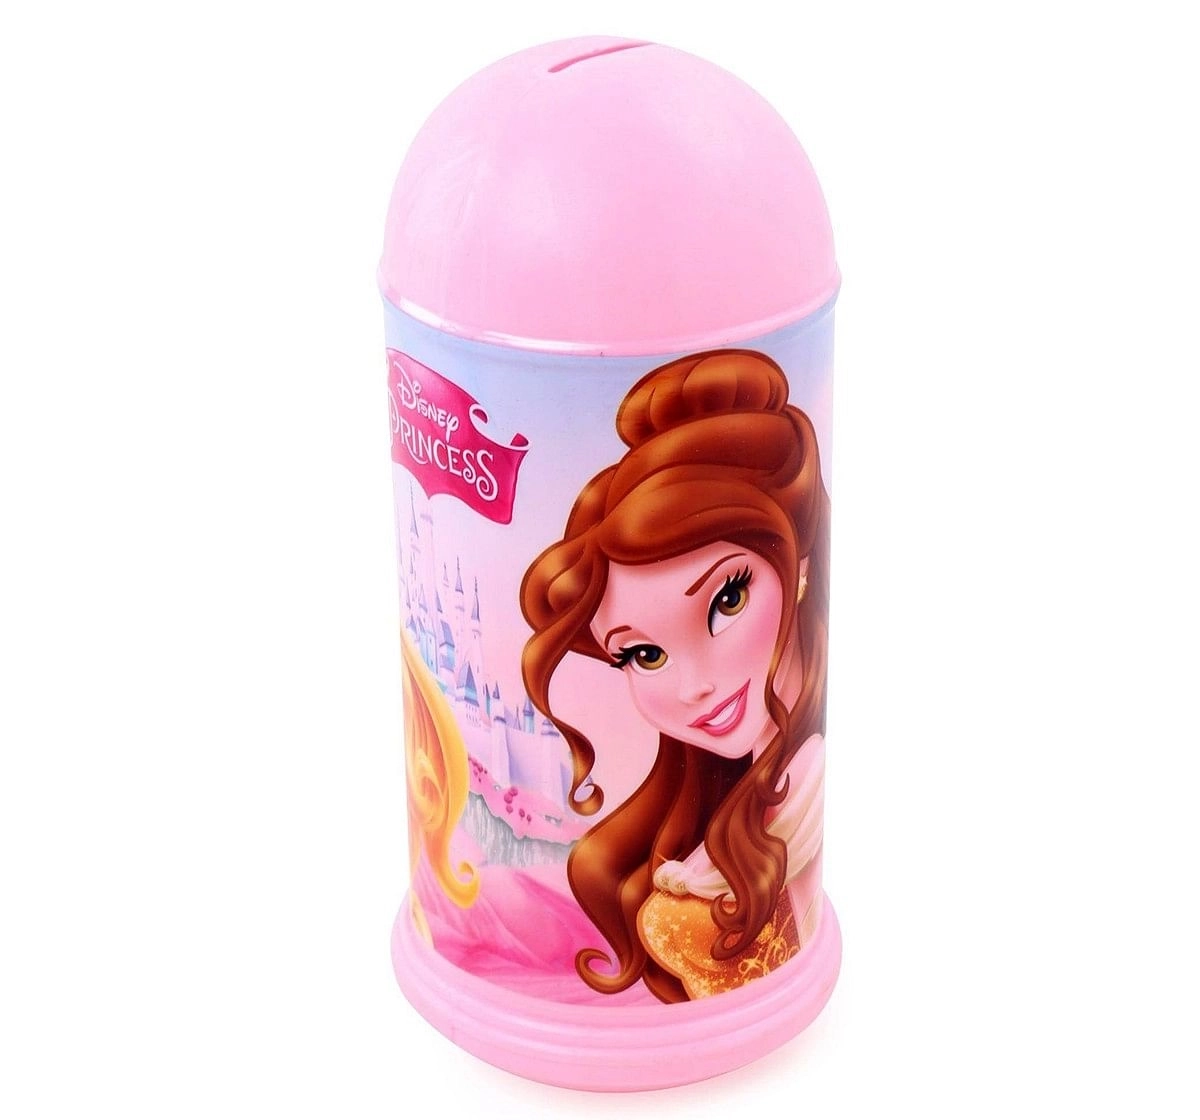 IToys Disney Princess Coin Bank Novelty for Kids Age 4Y+